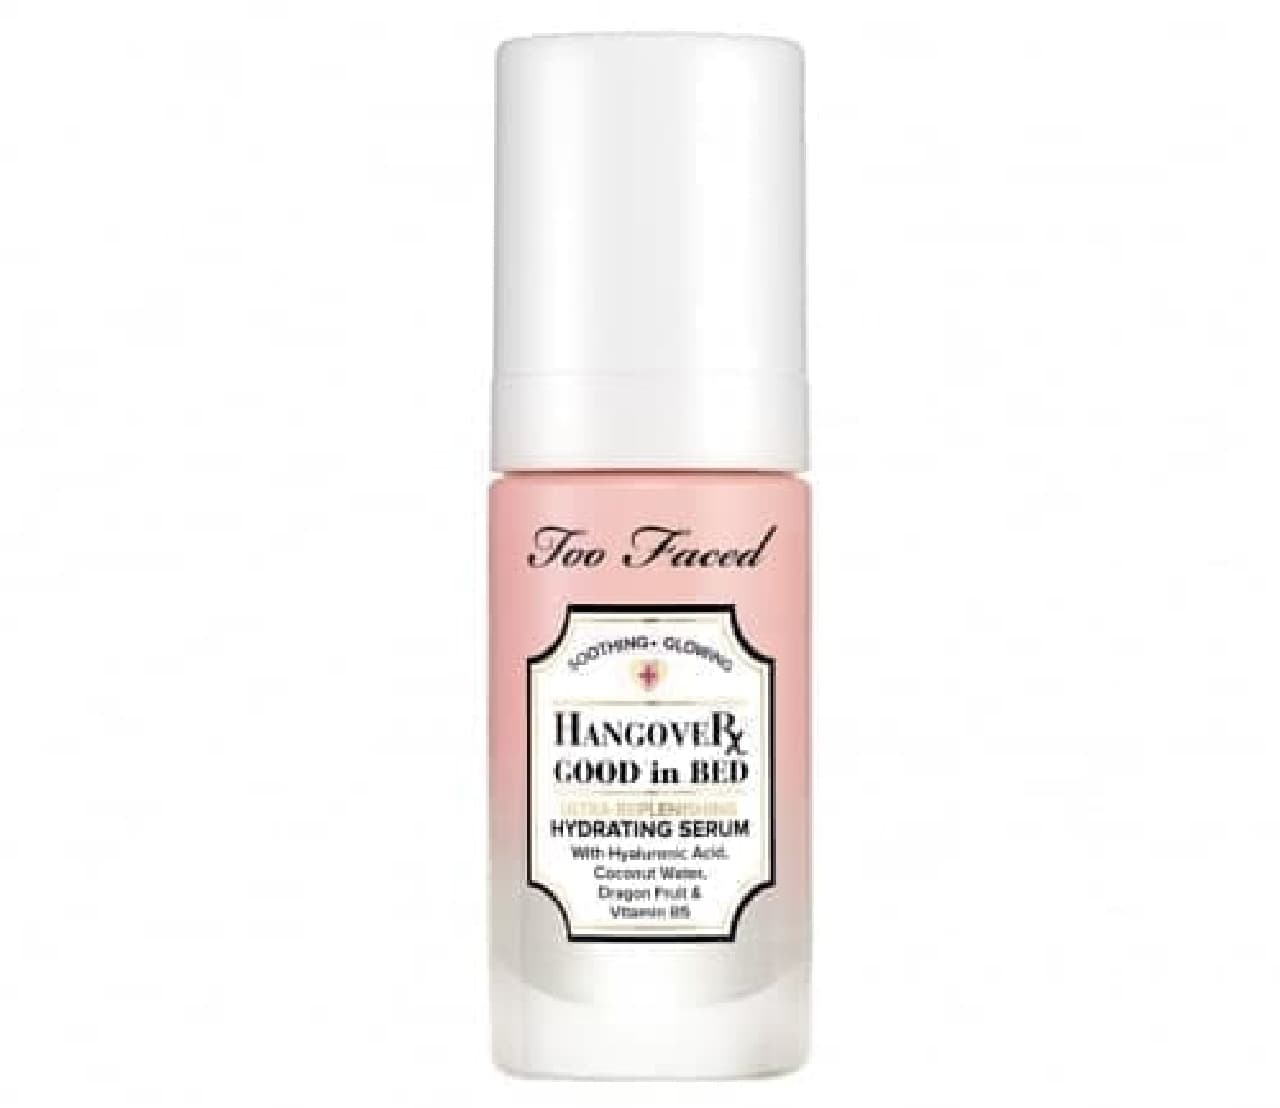 Too Faced Hangover Good In Bed Hydrating Serum